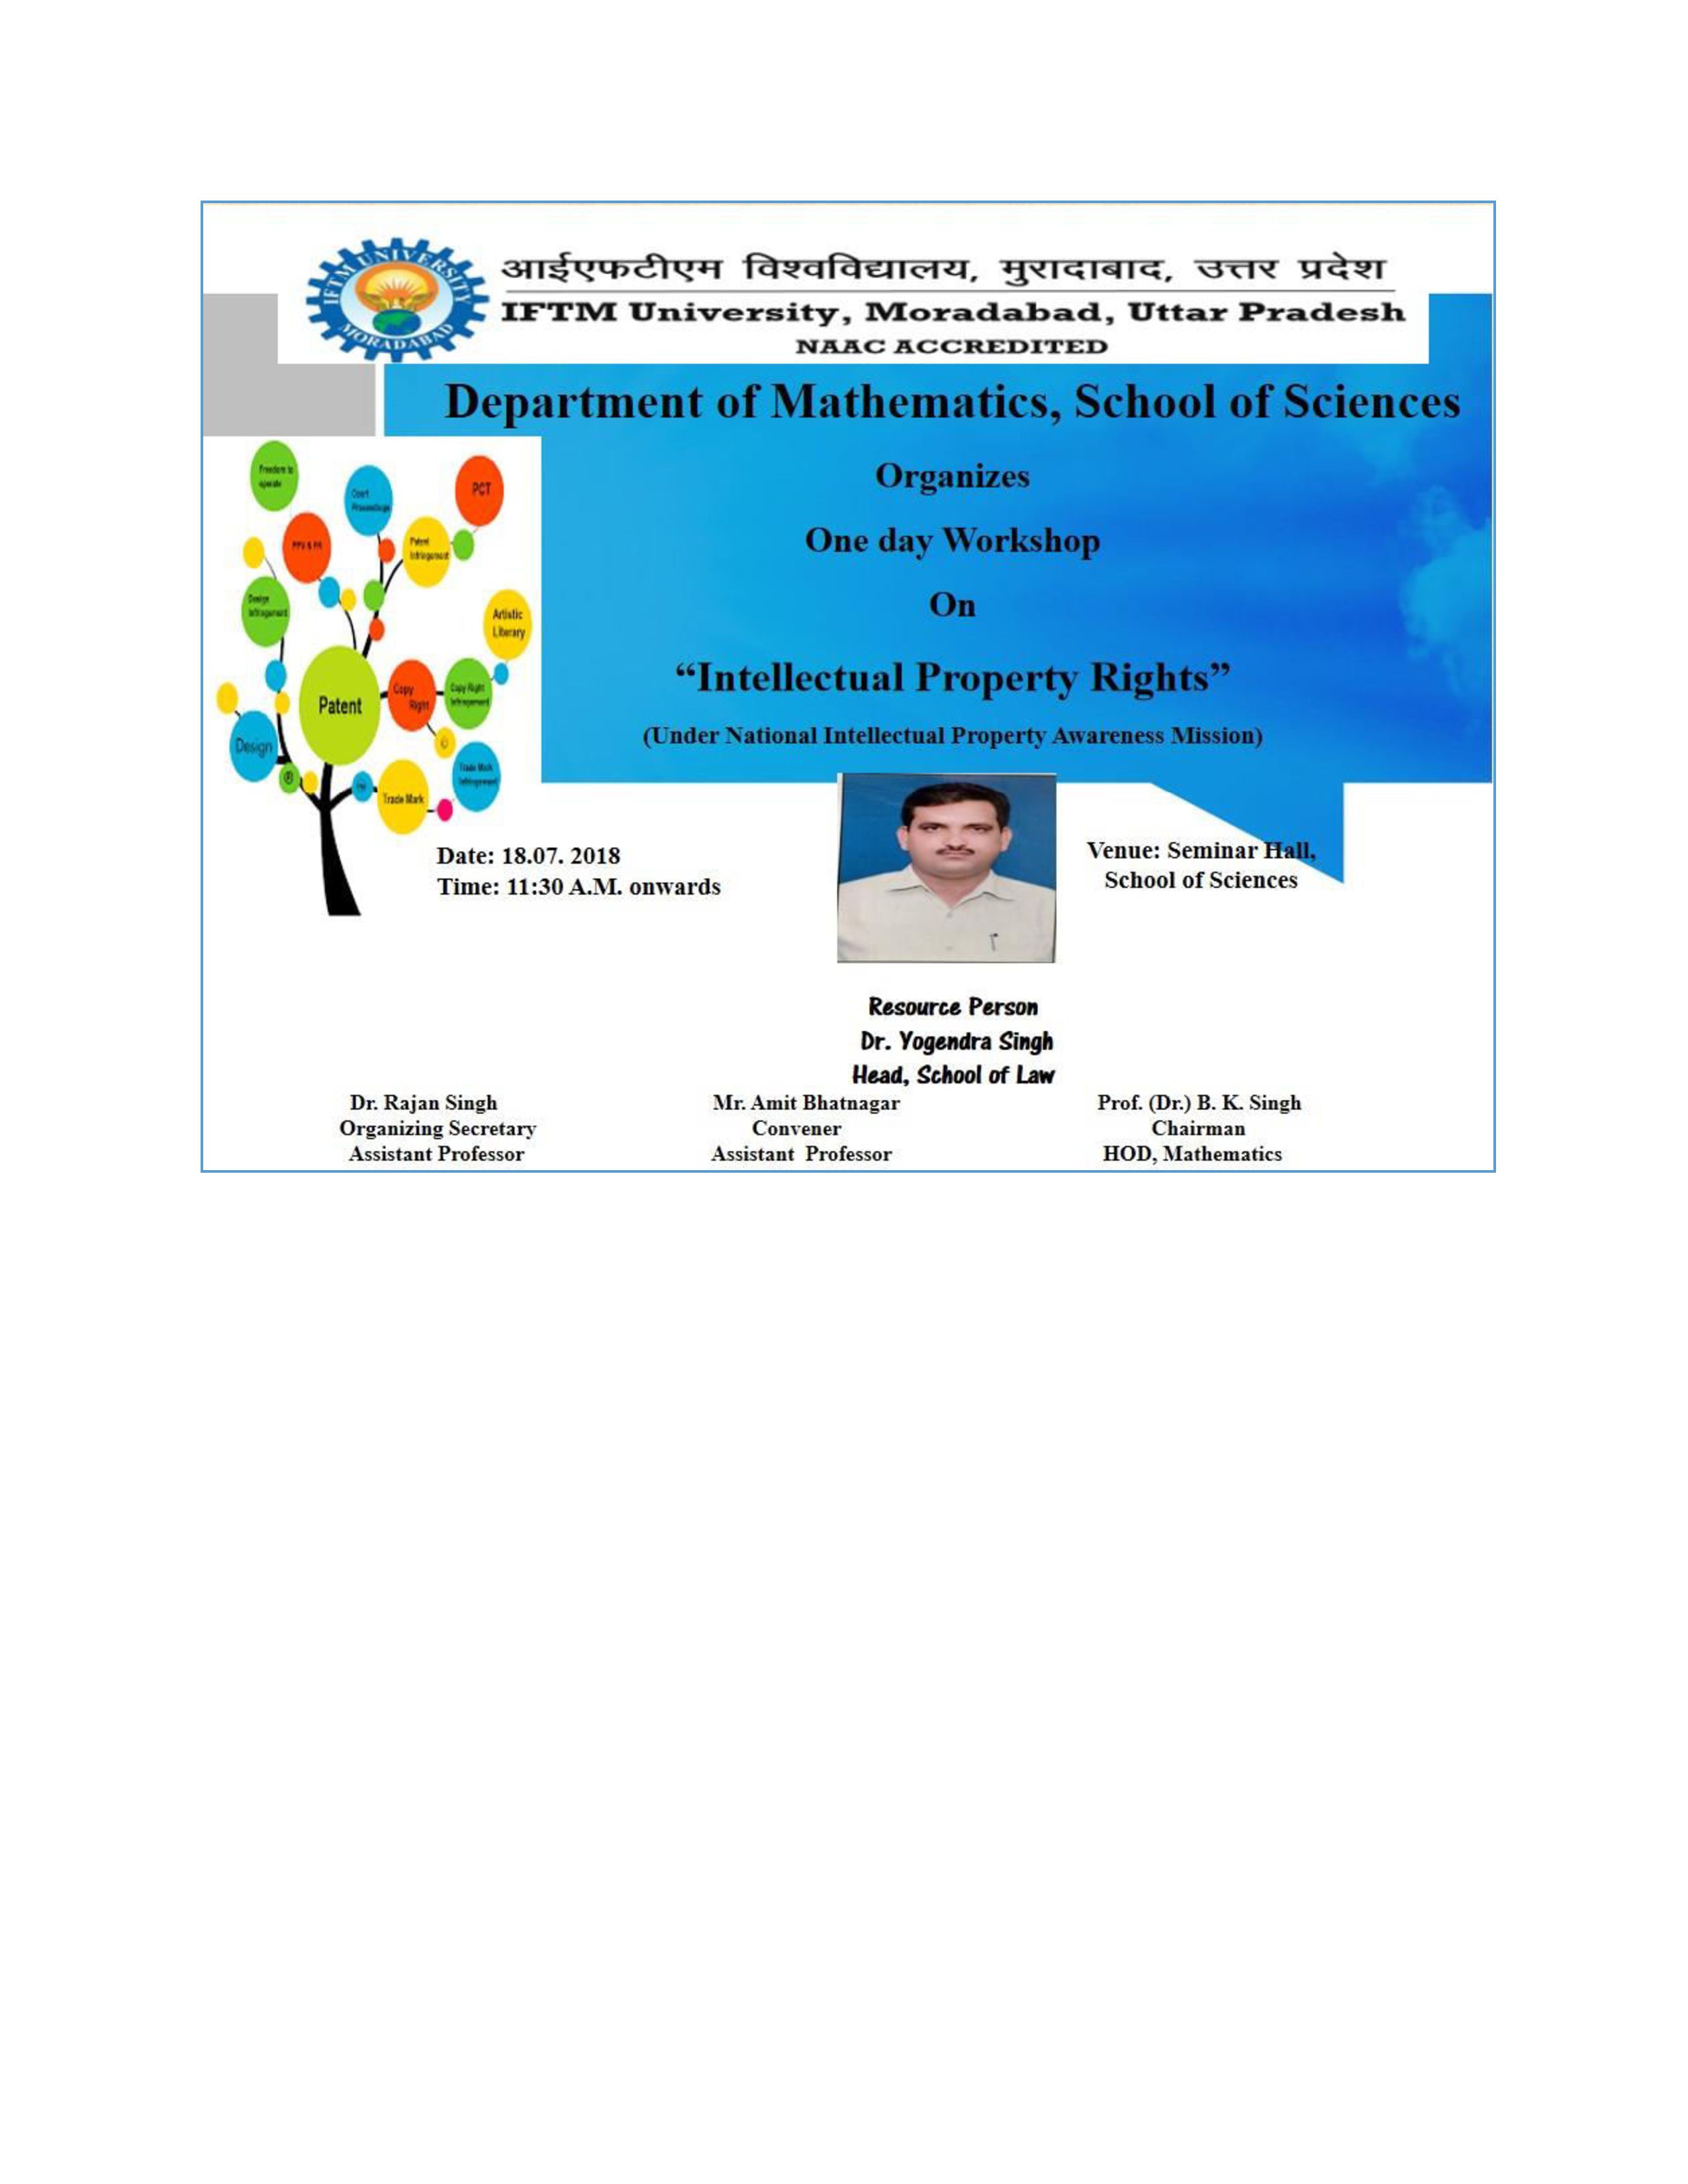 One day workshop on Intellectual Property Rights